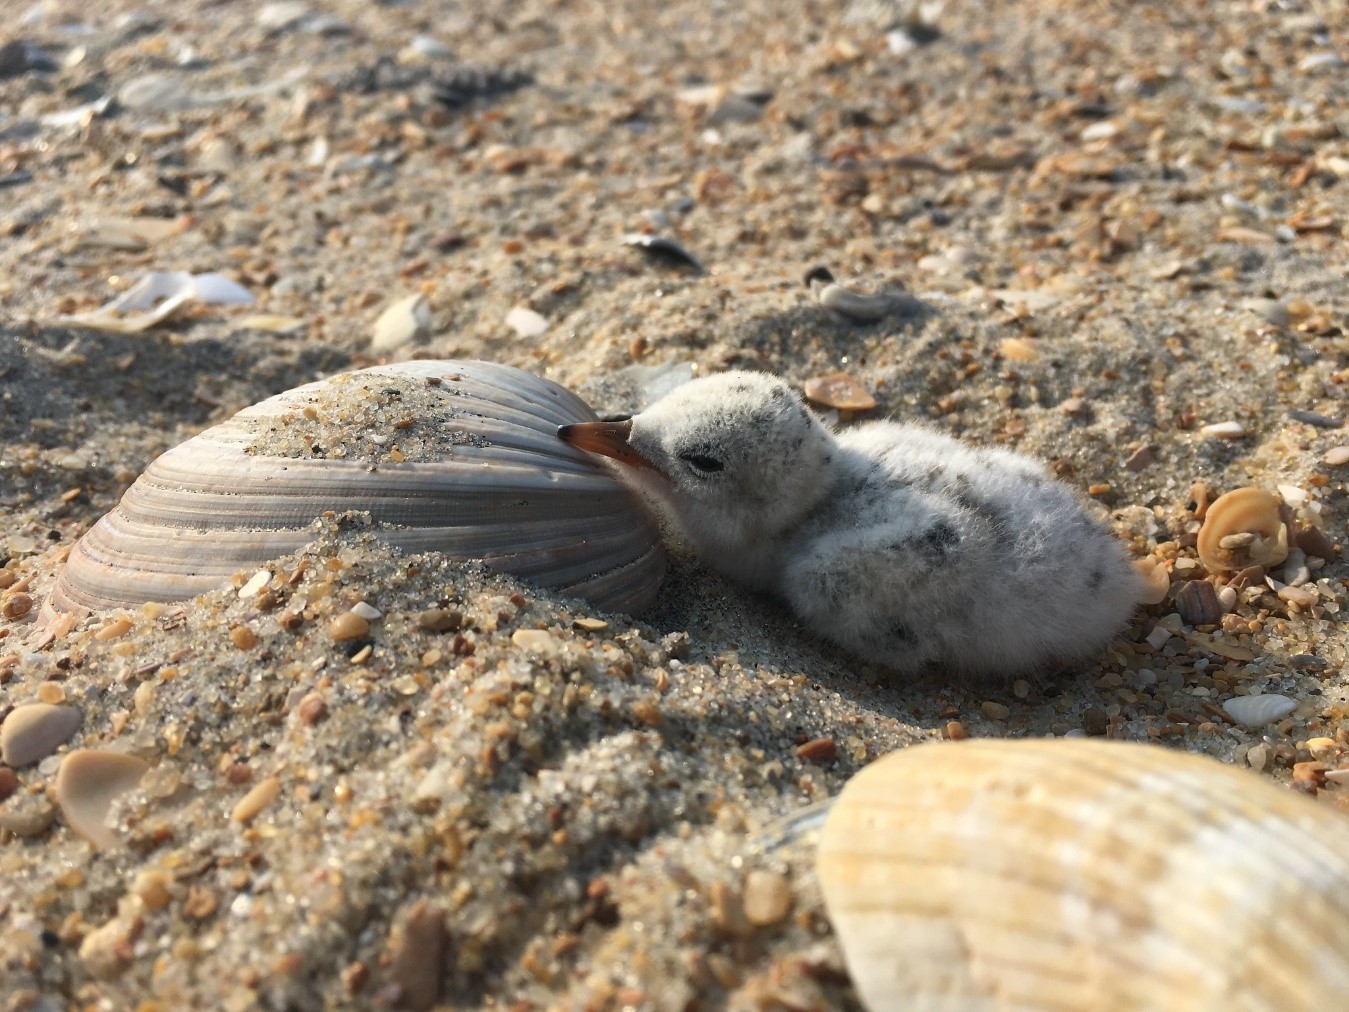 Small baby bird rests head on a shell at a sandy beach.